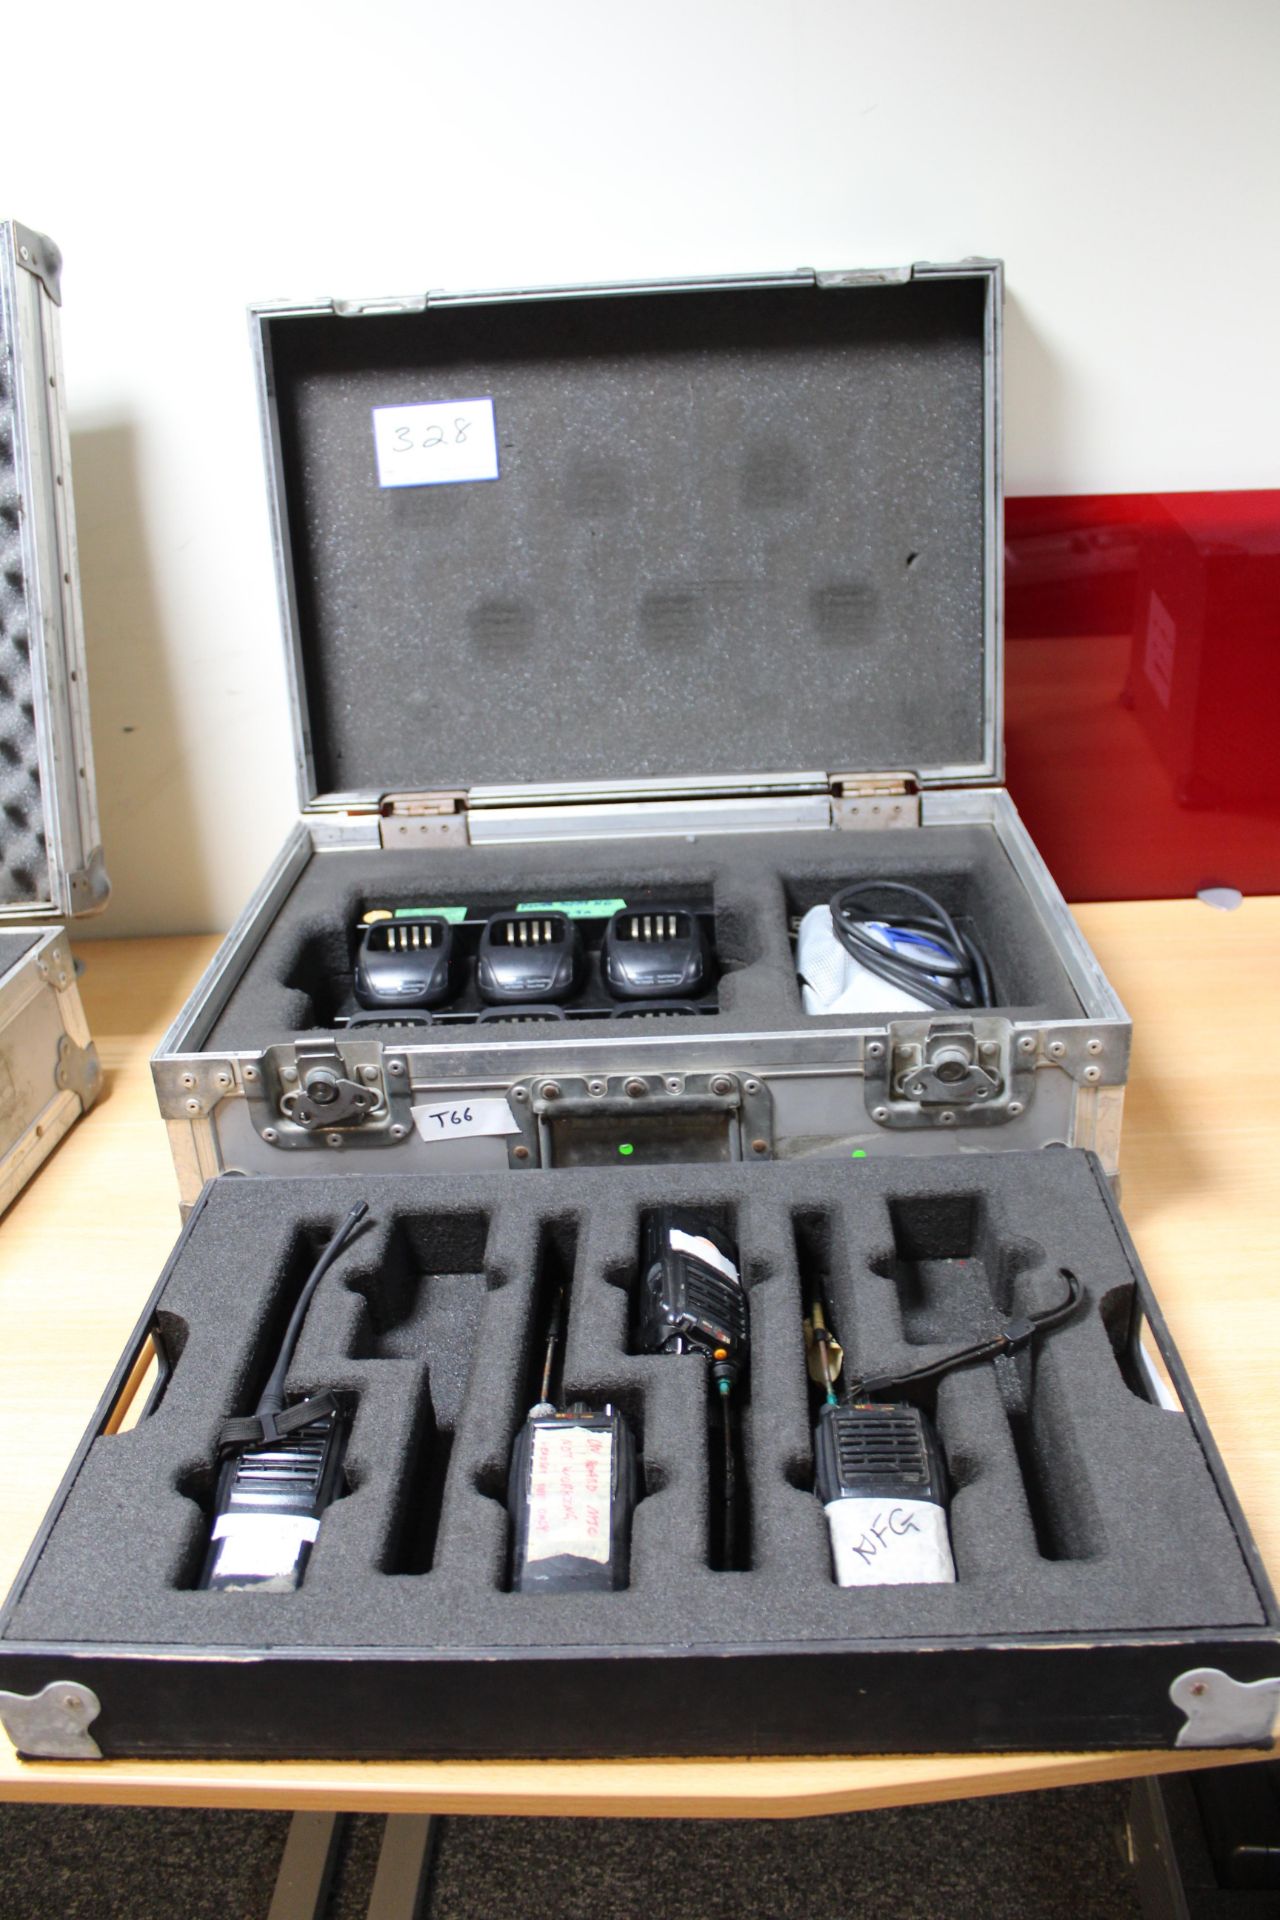 4 Red PT 600 walkie Talkies with Charging Station and Flight Case